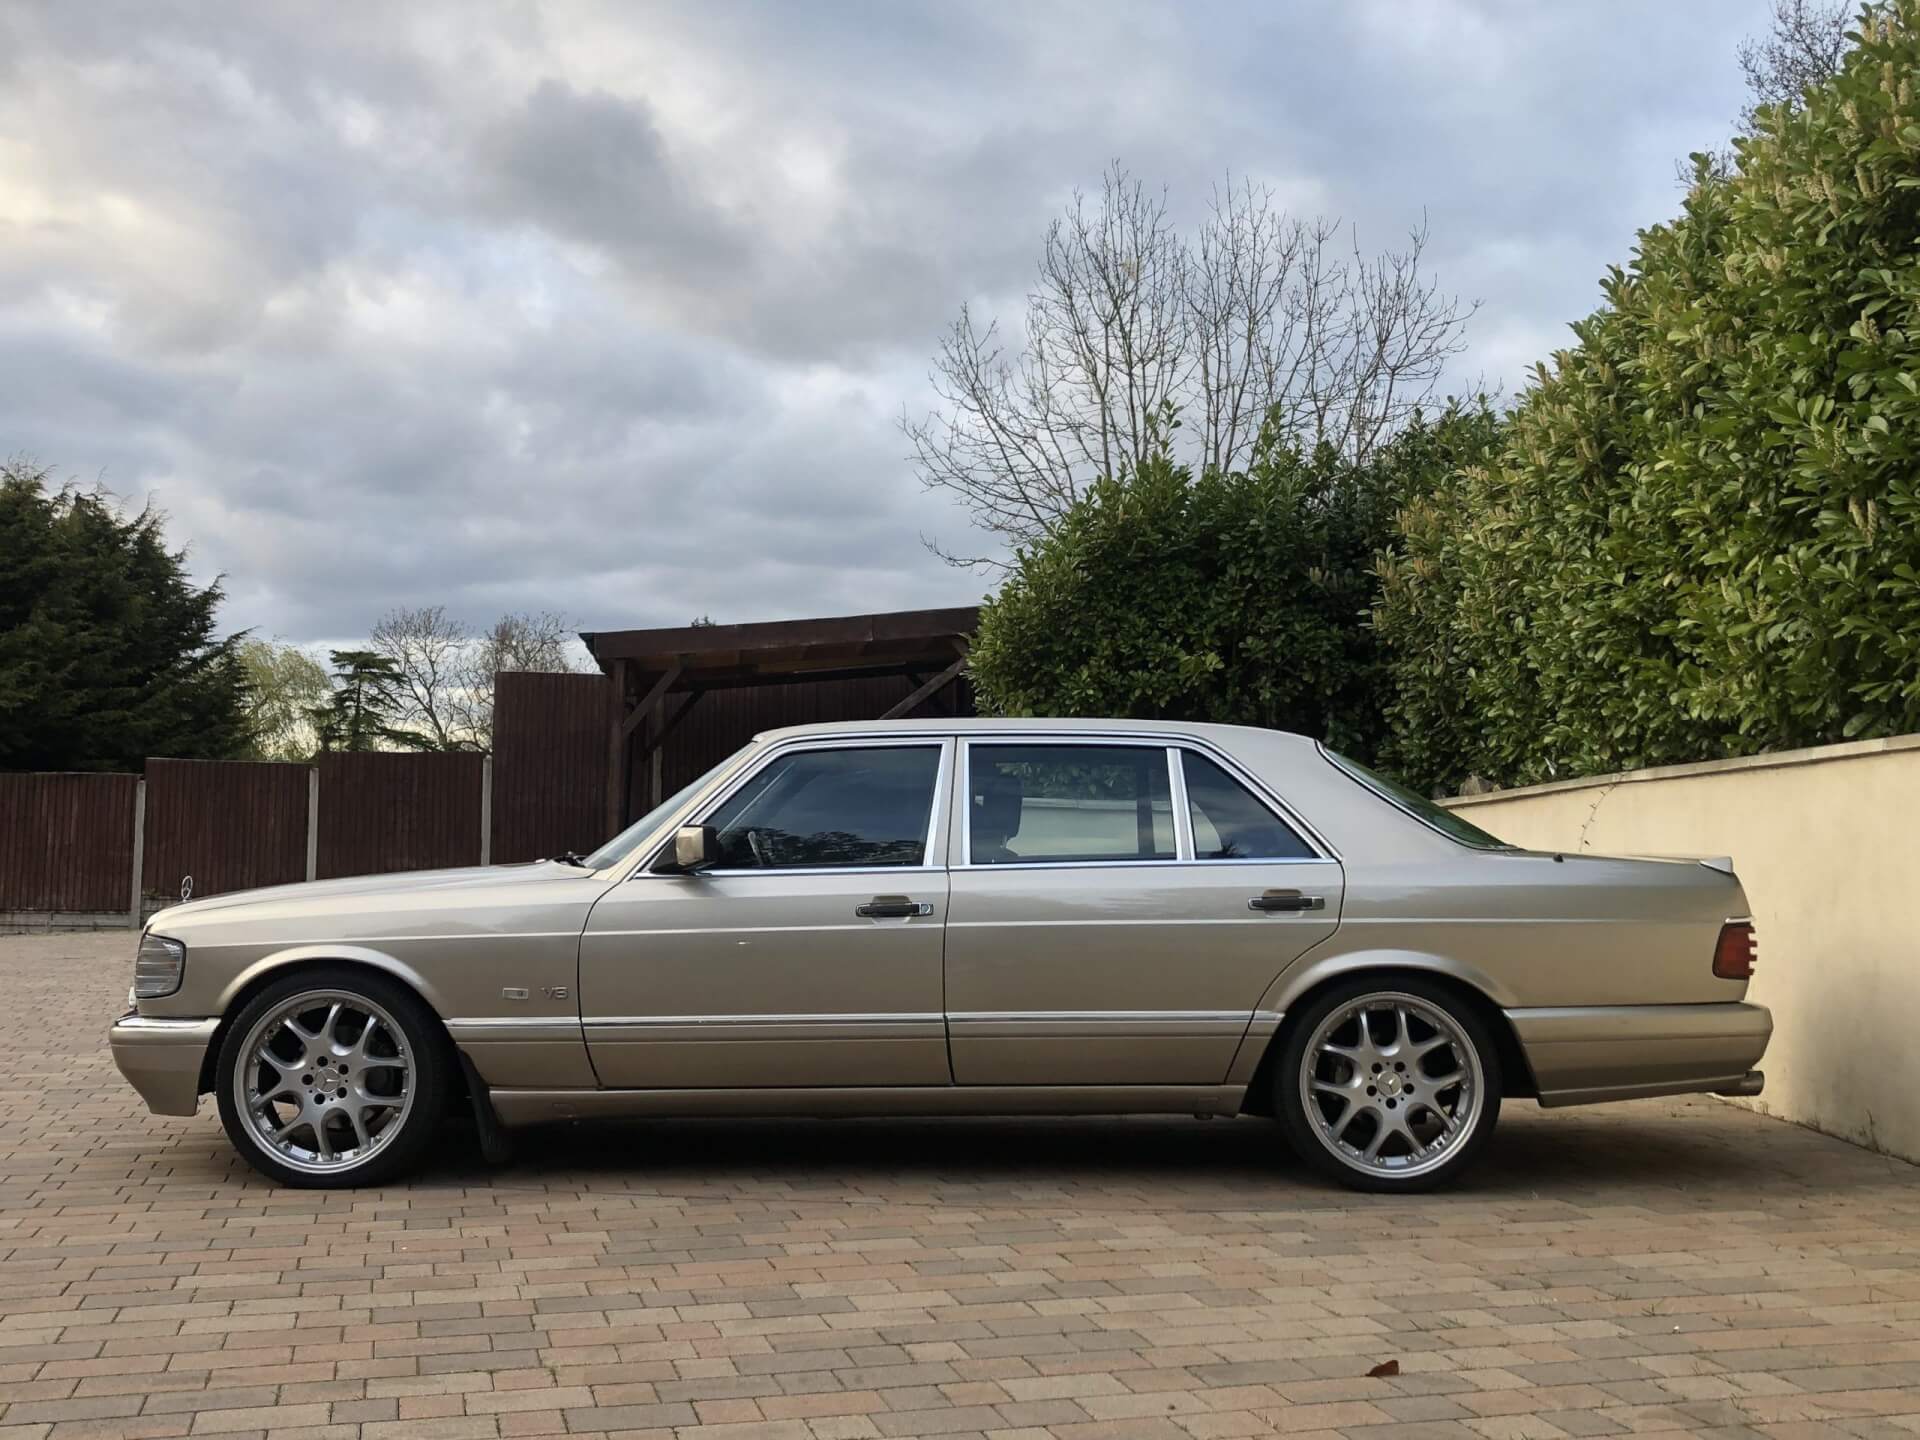 MERCEDES 560 SEL SIDE VIEW